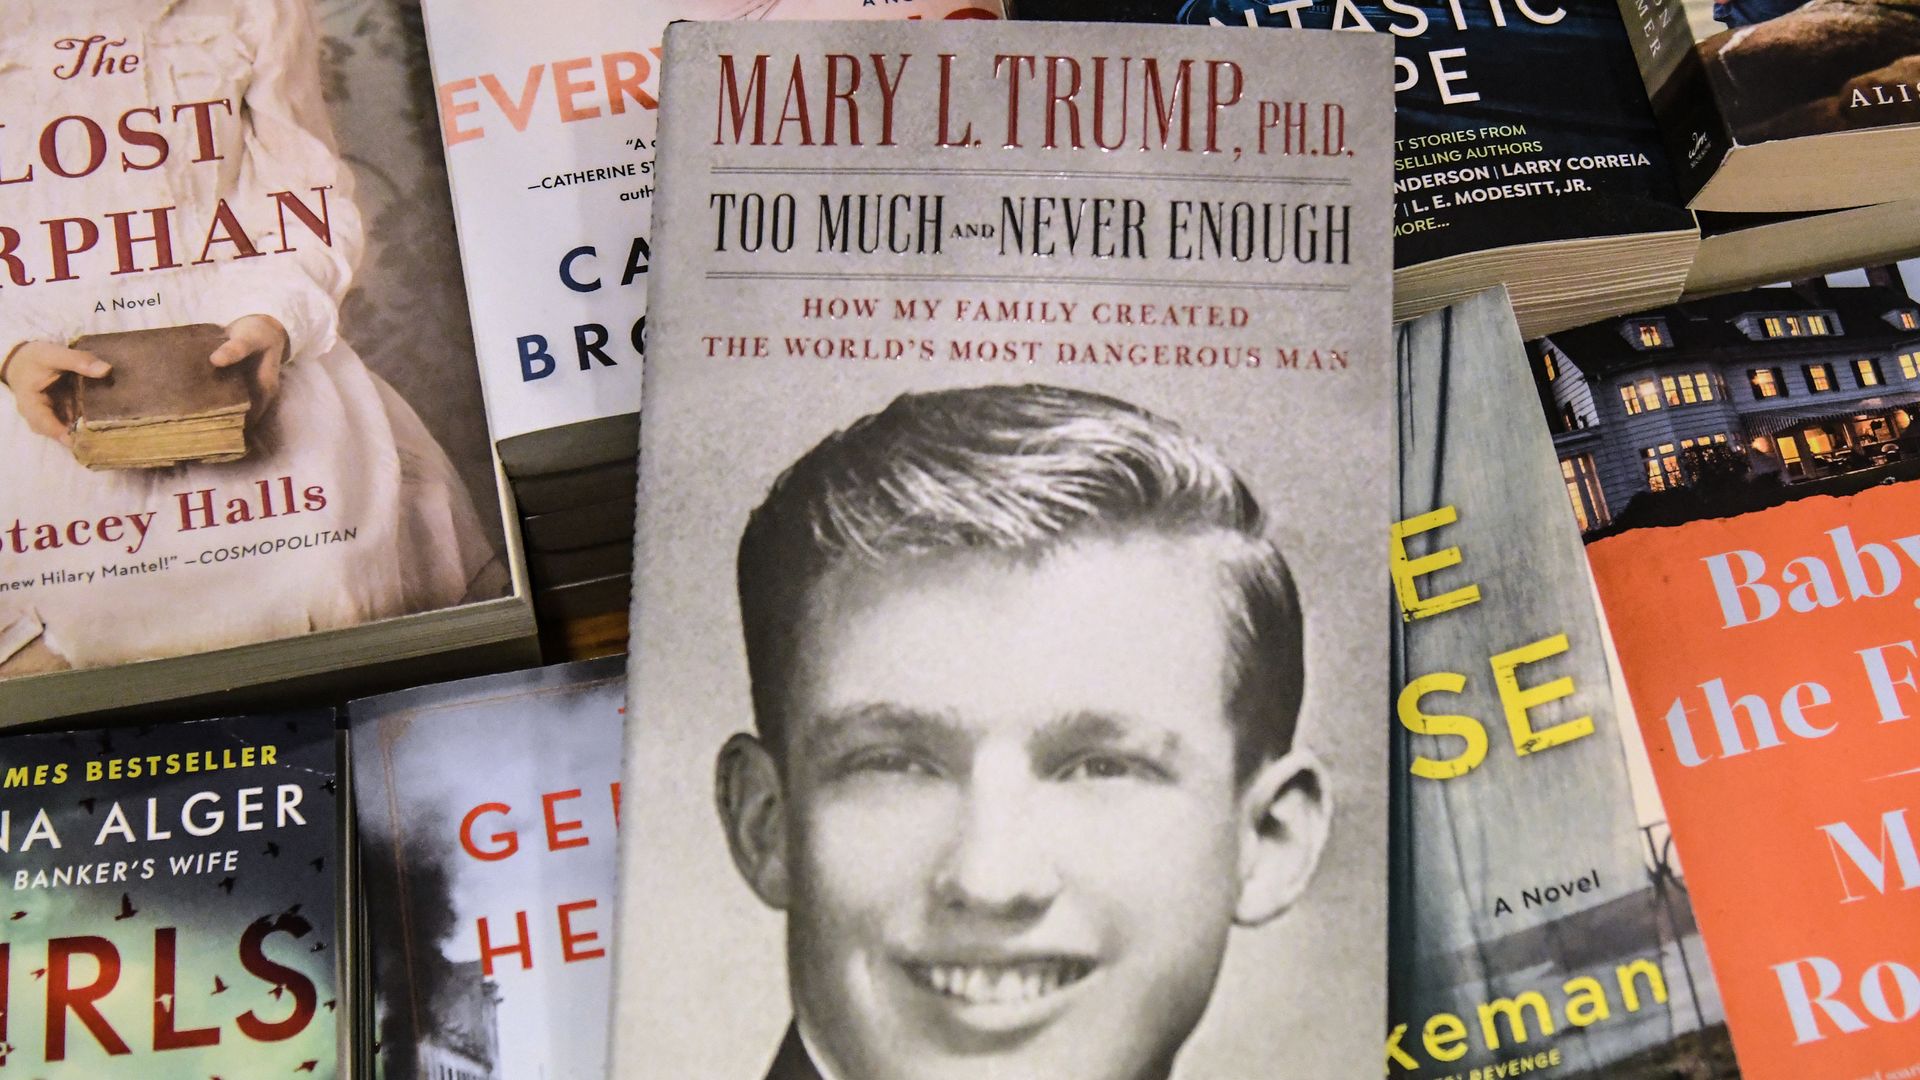 Mary Trump's new book about U.S. President Donald Trump is on display at a book store